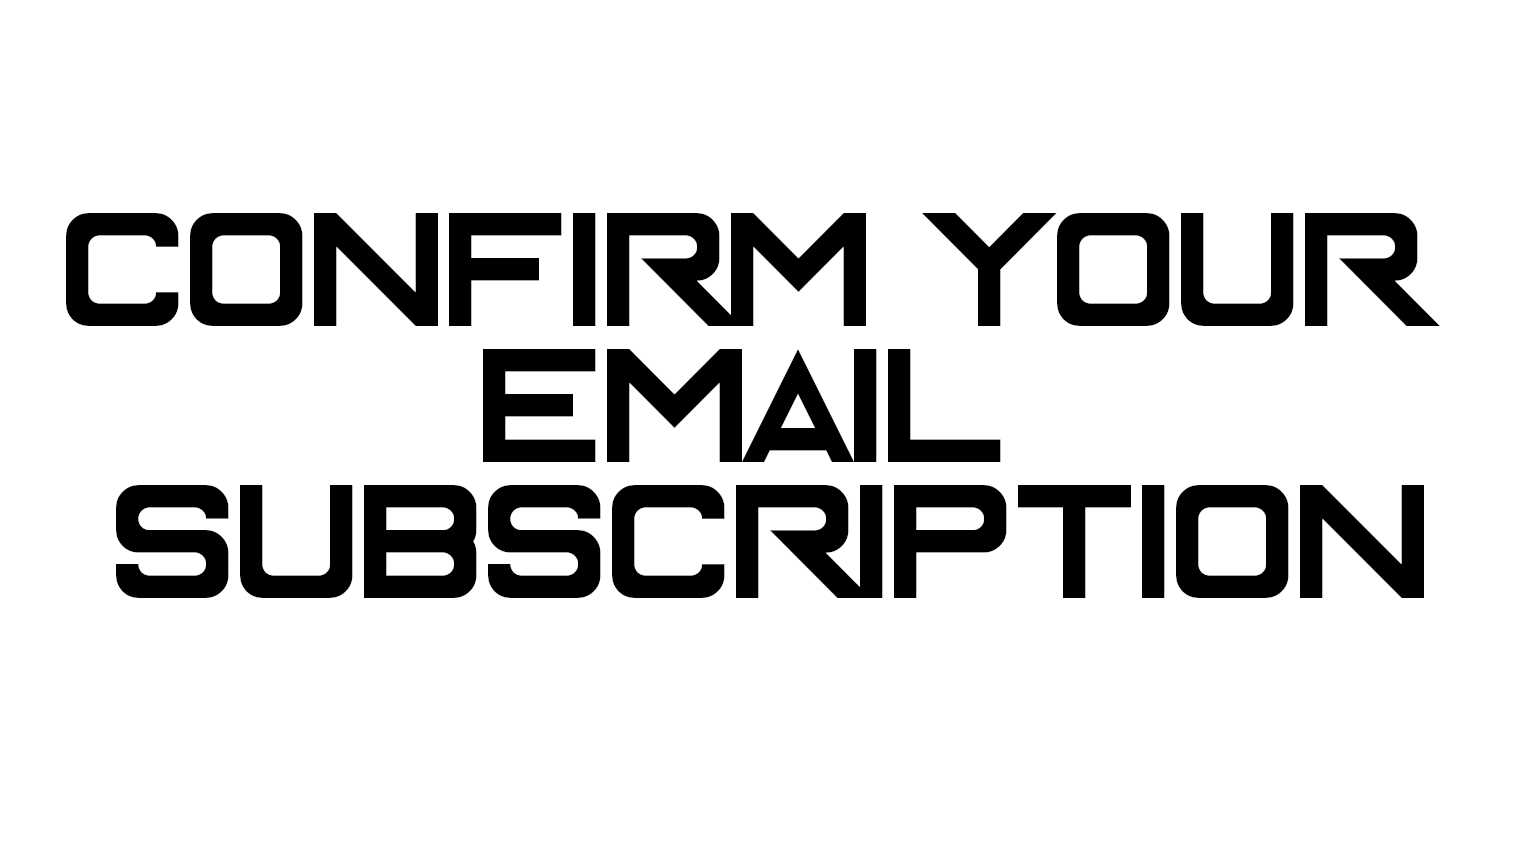 Email Subscription Testing